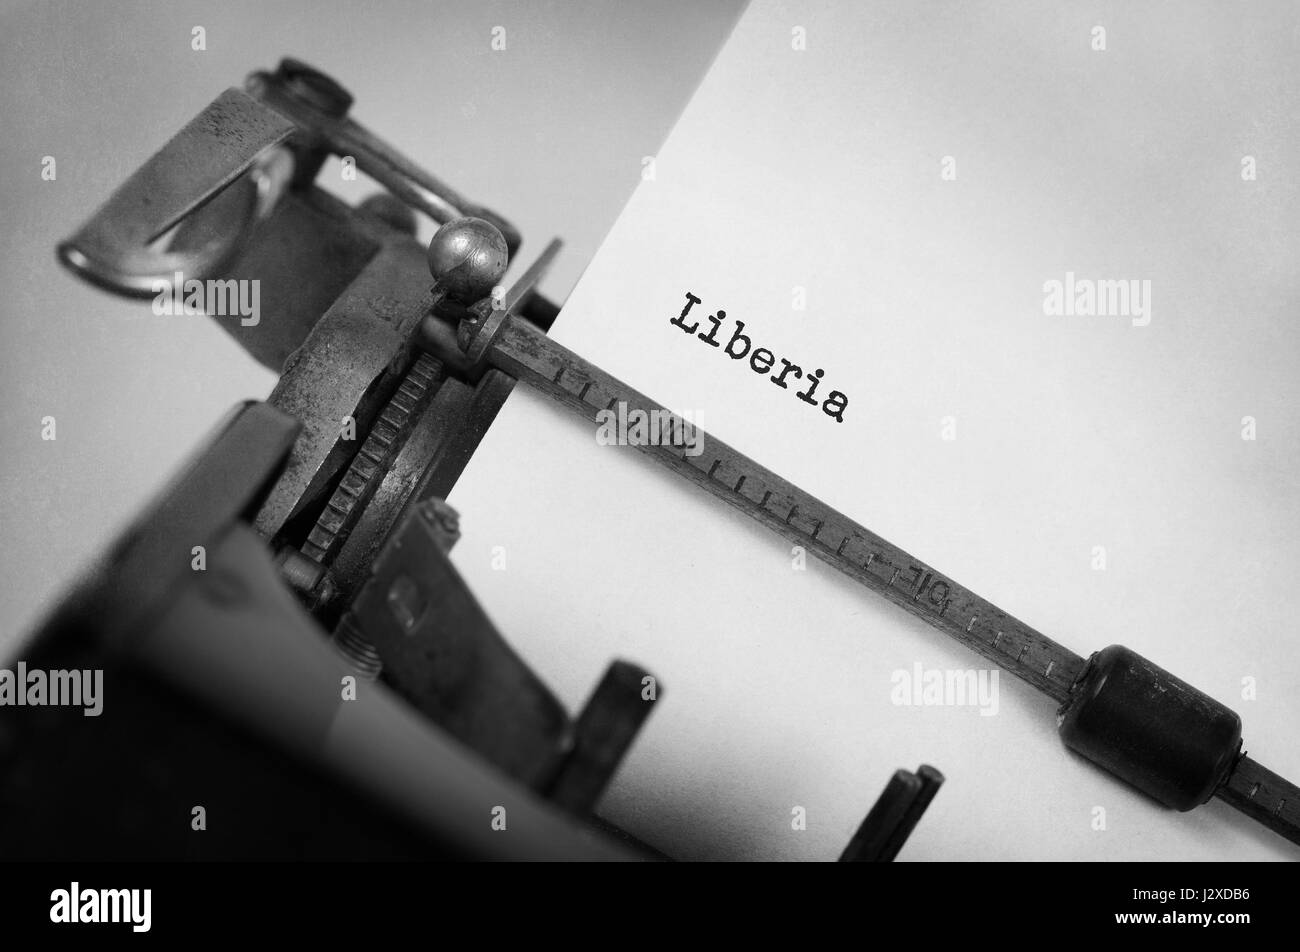 Inscription made by vinrage typewriter, country, Liberia Stock Photo